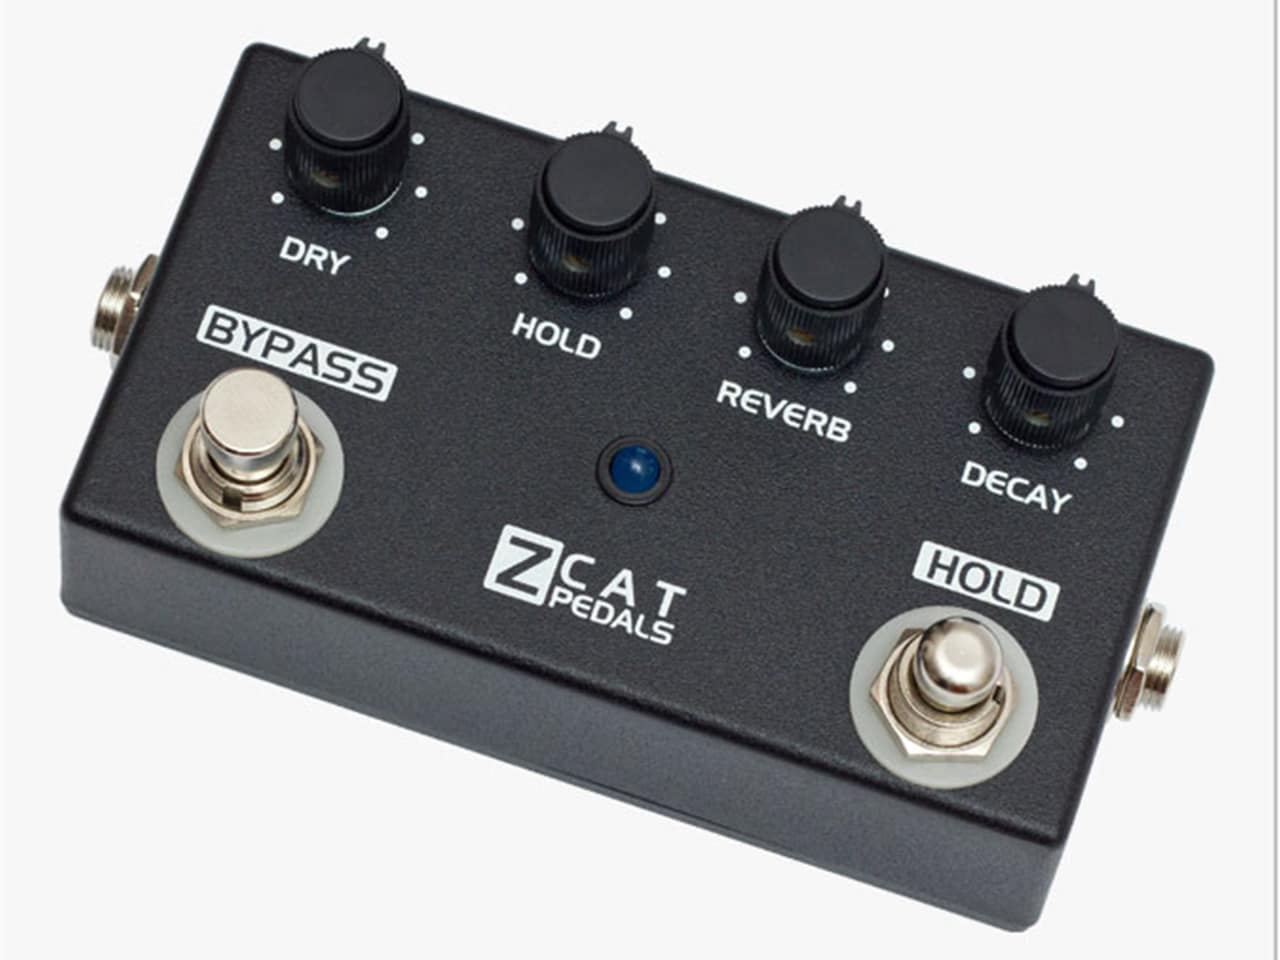 ZCAT Pedals(ジーキャットペダル) Hold-Reverb (リバーブ)